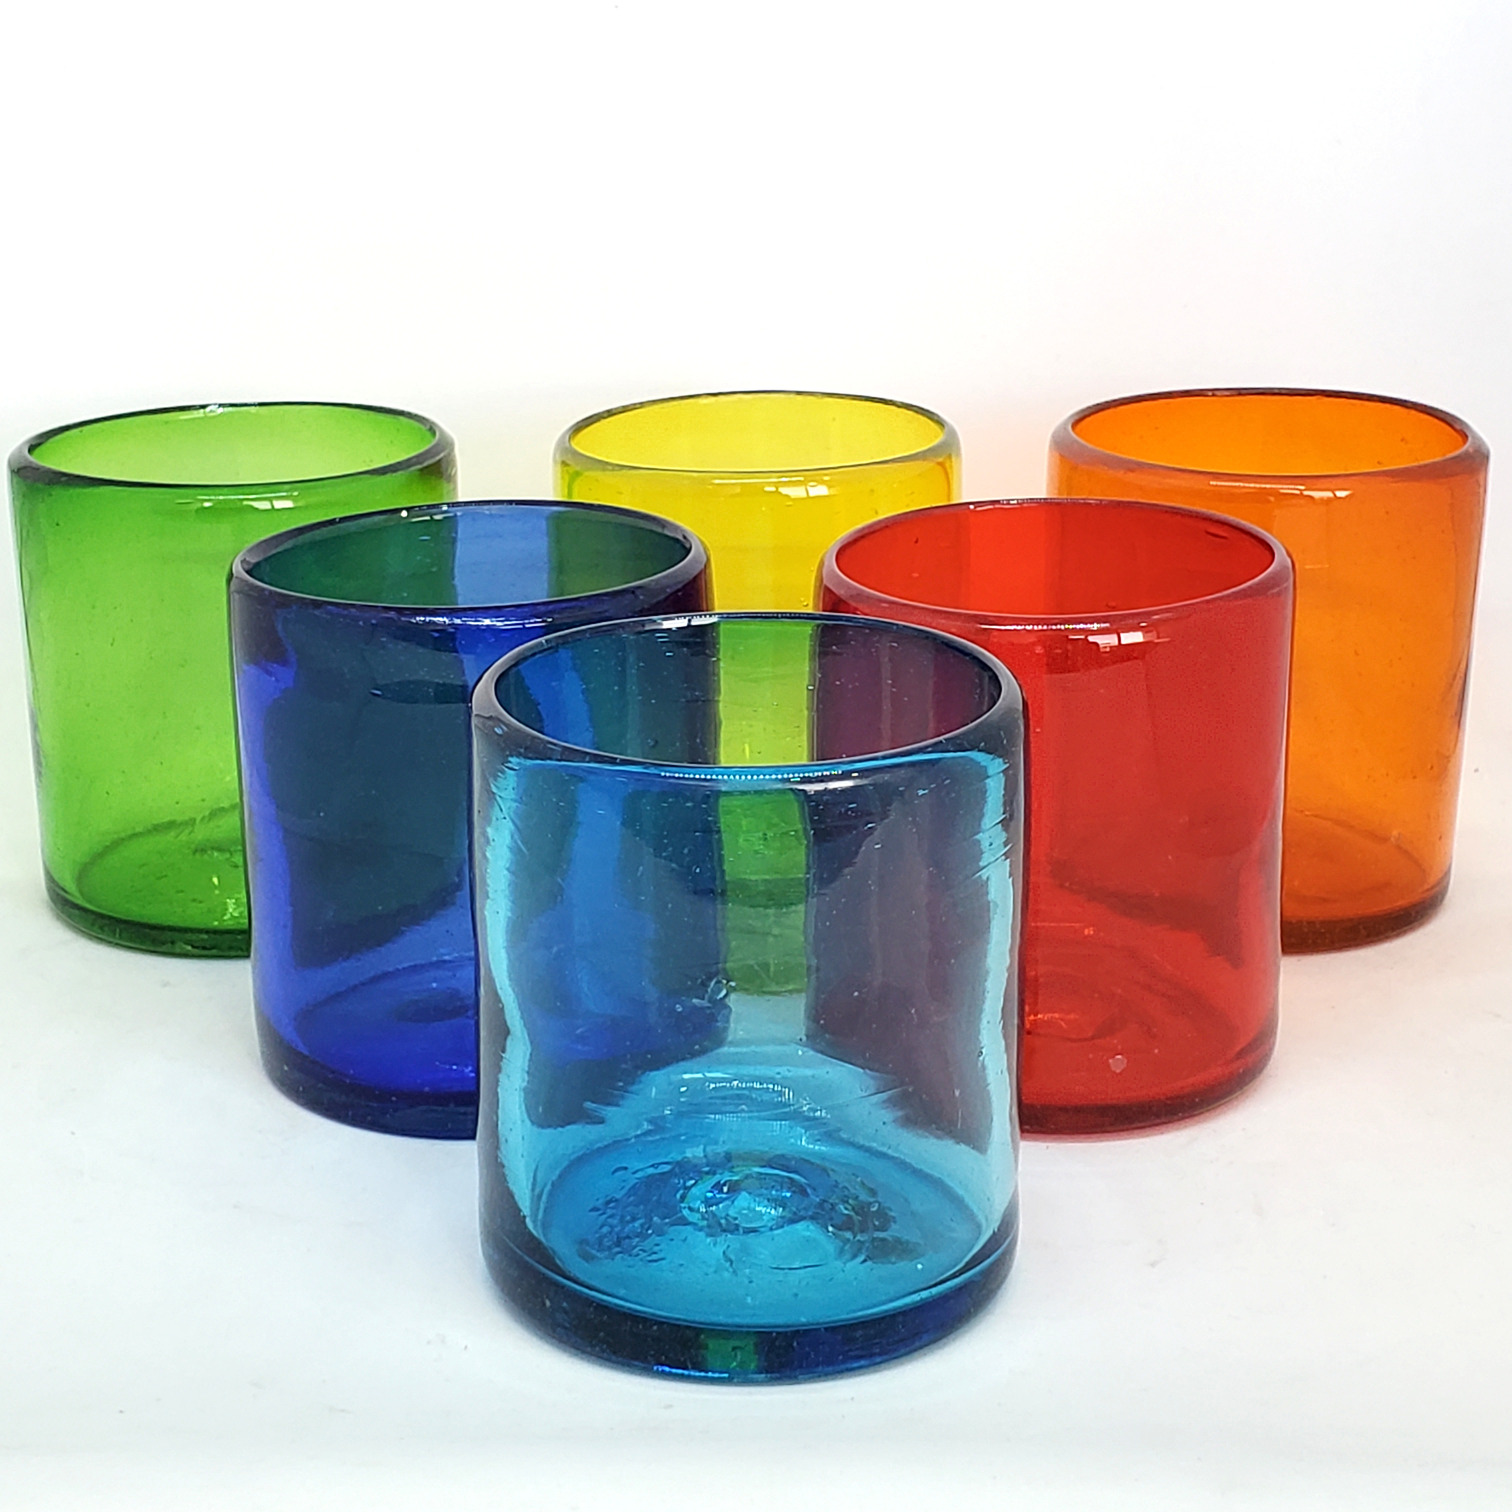 Wholesale Colored Glassware / Rainbow Colored 9 oz Short Tumblers  / Enhance your favorite drink with these colorful handcrafted glasses.